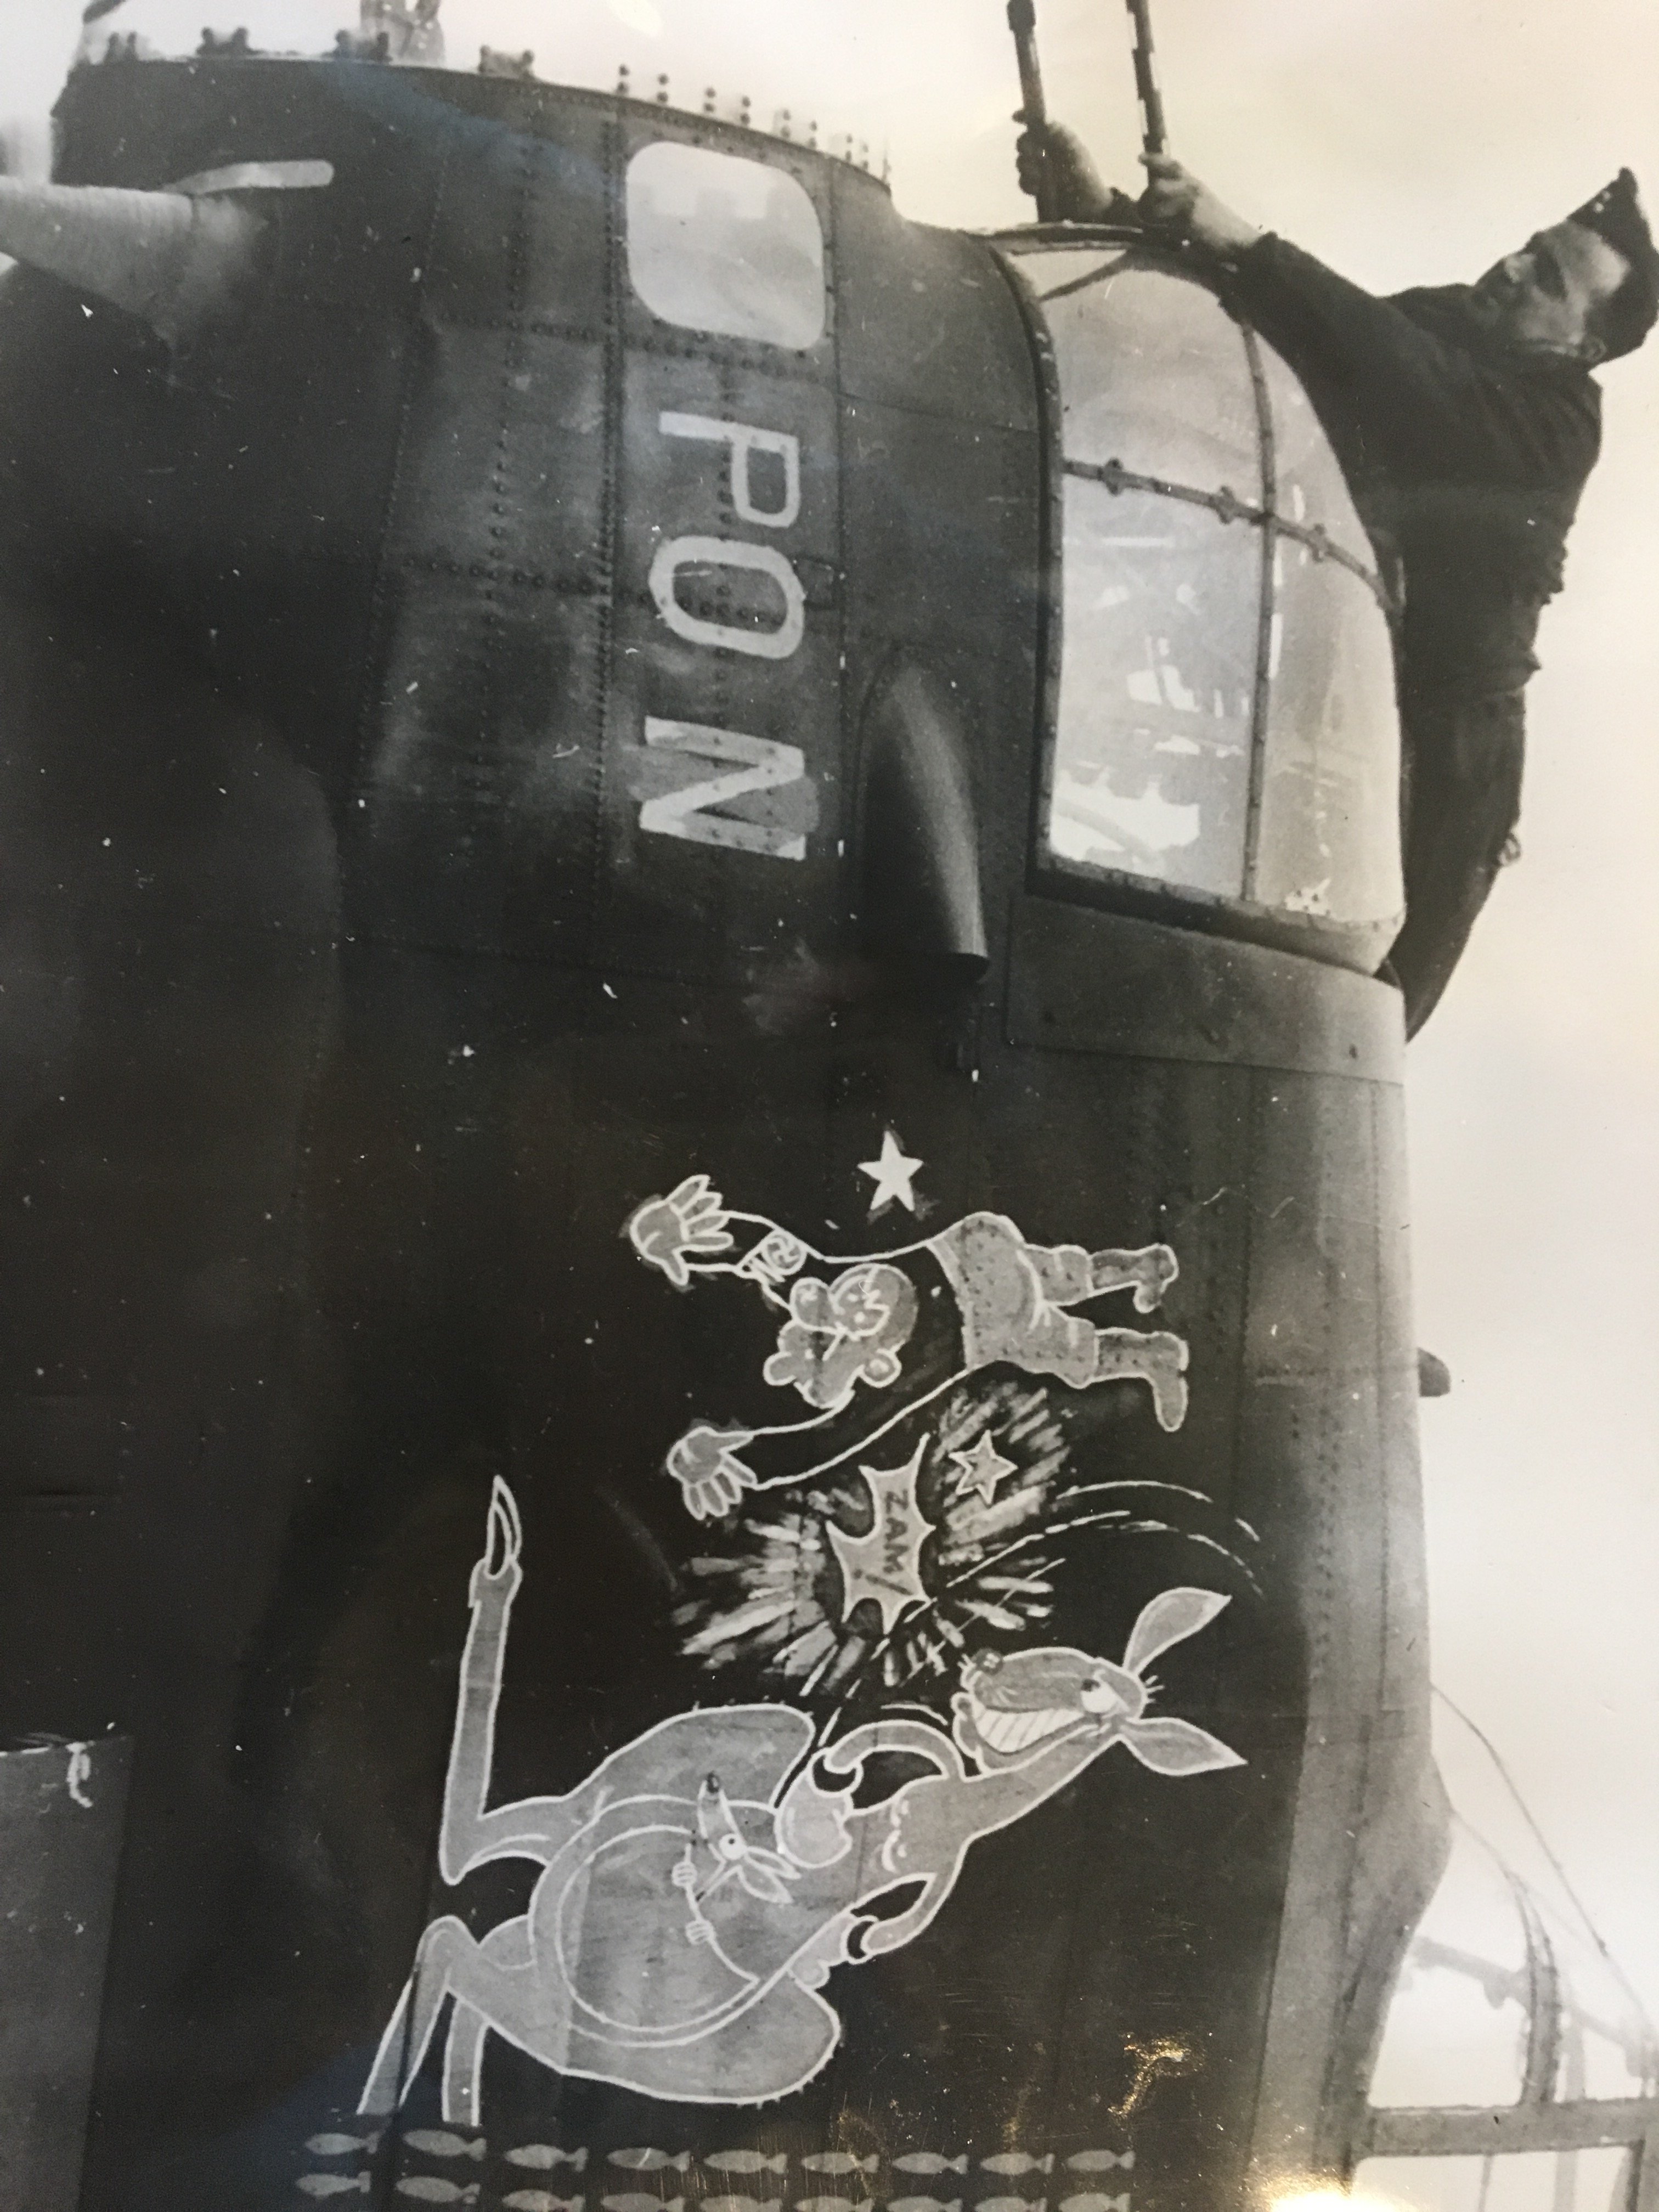 N-Nuts: Boxing kangaroo with joey punching Hitler, row of bombs alongside, letters PON painted on nose of plane [Emblems on R.A.A.F. Squadron aircraft in the R.A.F. during World War II ca. 1943-45]; H2000.200/1809-1827